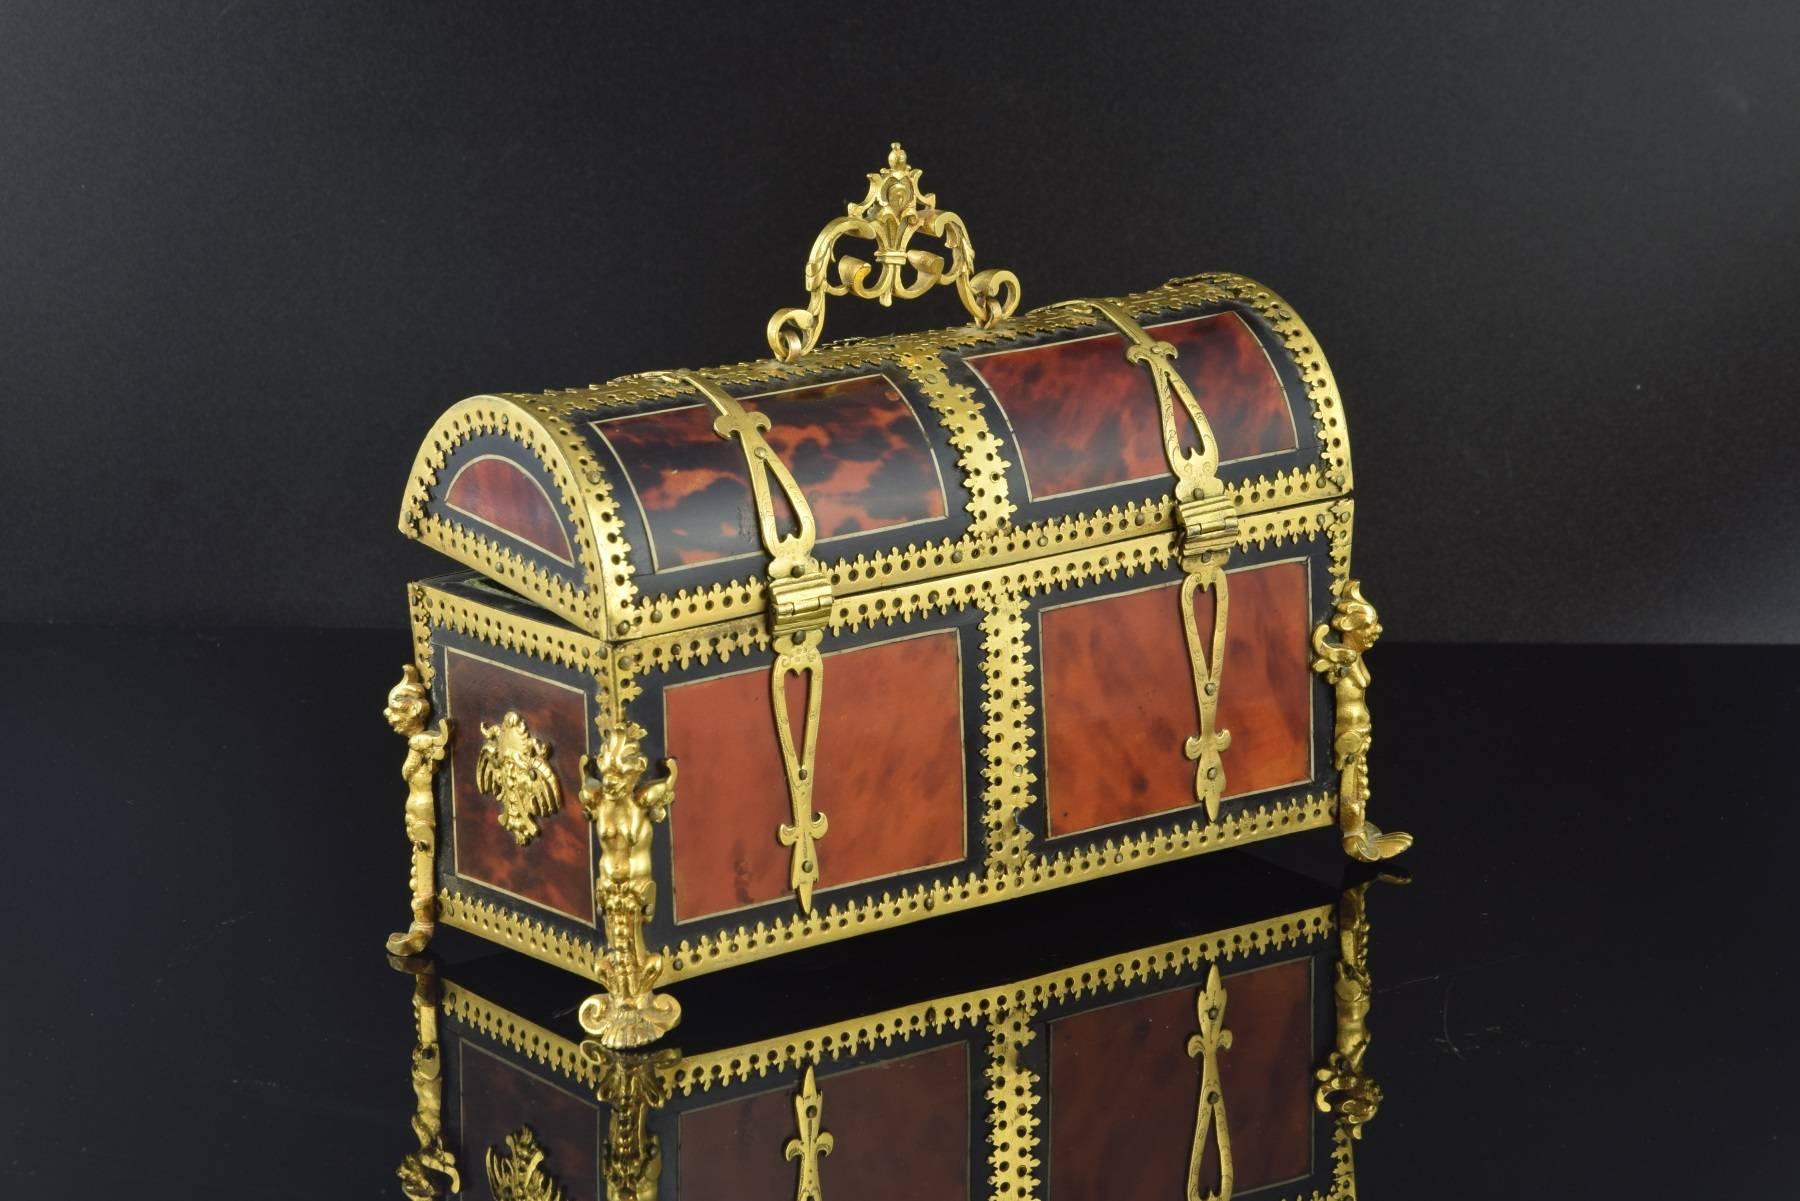 Late 18th century chest
Wood, gold bronze and hawksbill.
Chest made at the end of the 18th century, with a wooden structure composed of a prismatic base and a vaulted cover, articulated by two hinges extended to the outside with motifs and